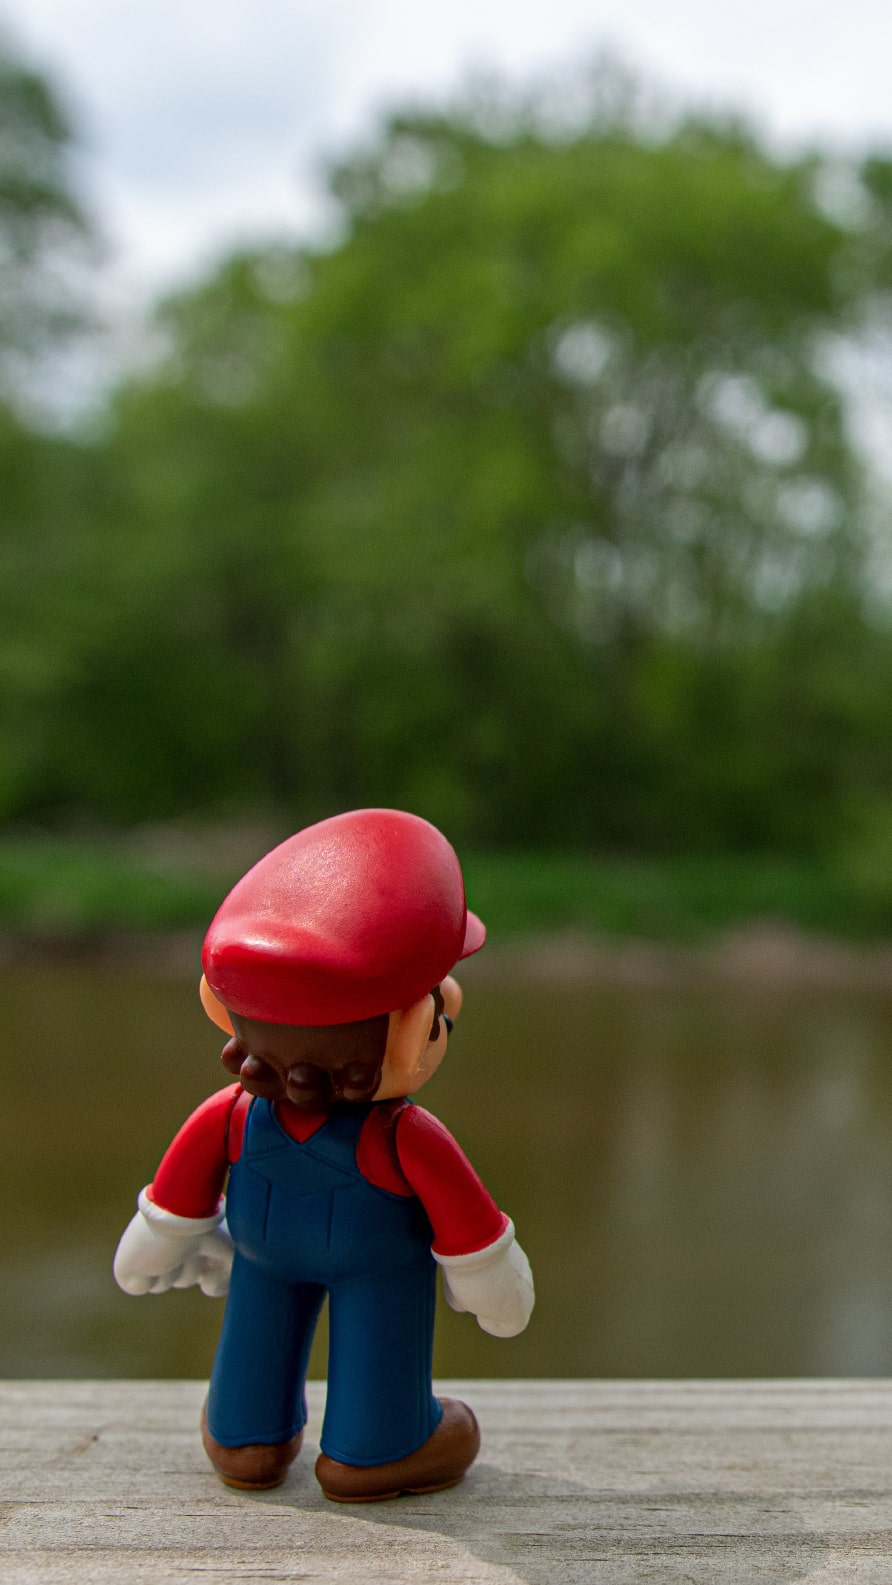 iPhone wallpapers featuring Mario Bros